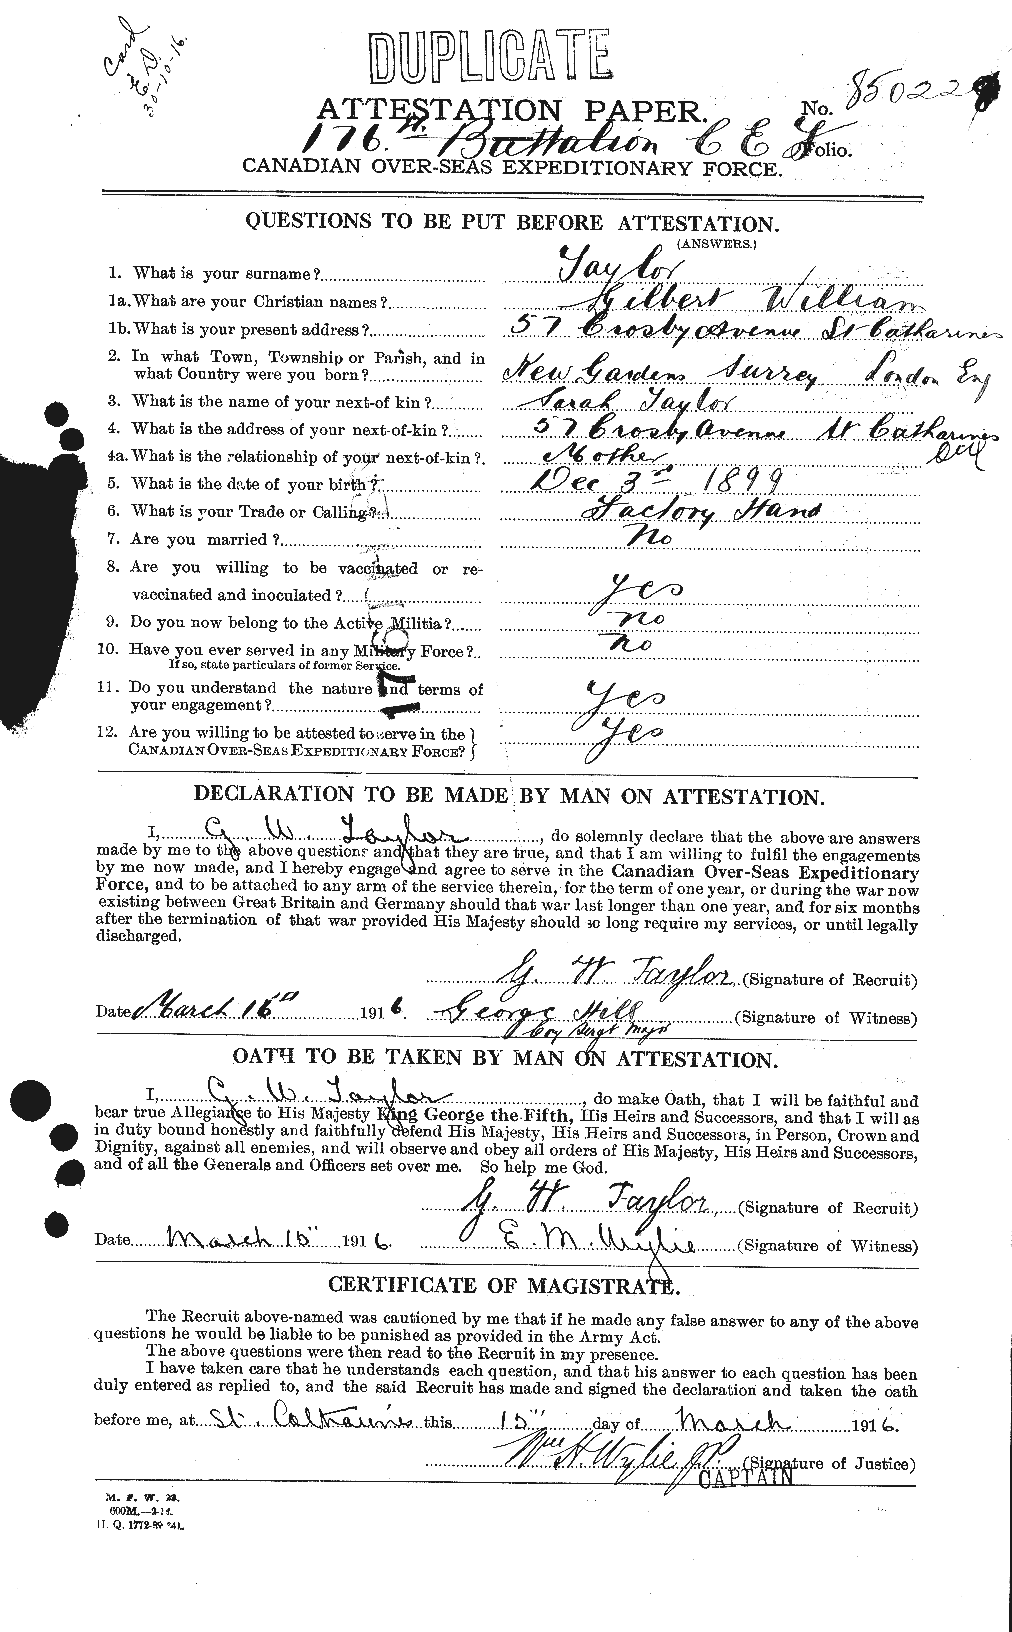 Personnel Records of the First World War - CEF 626381a